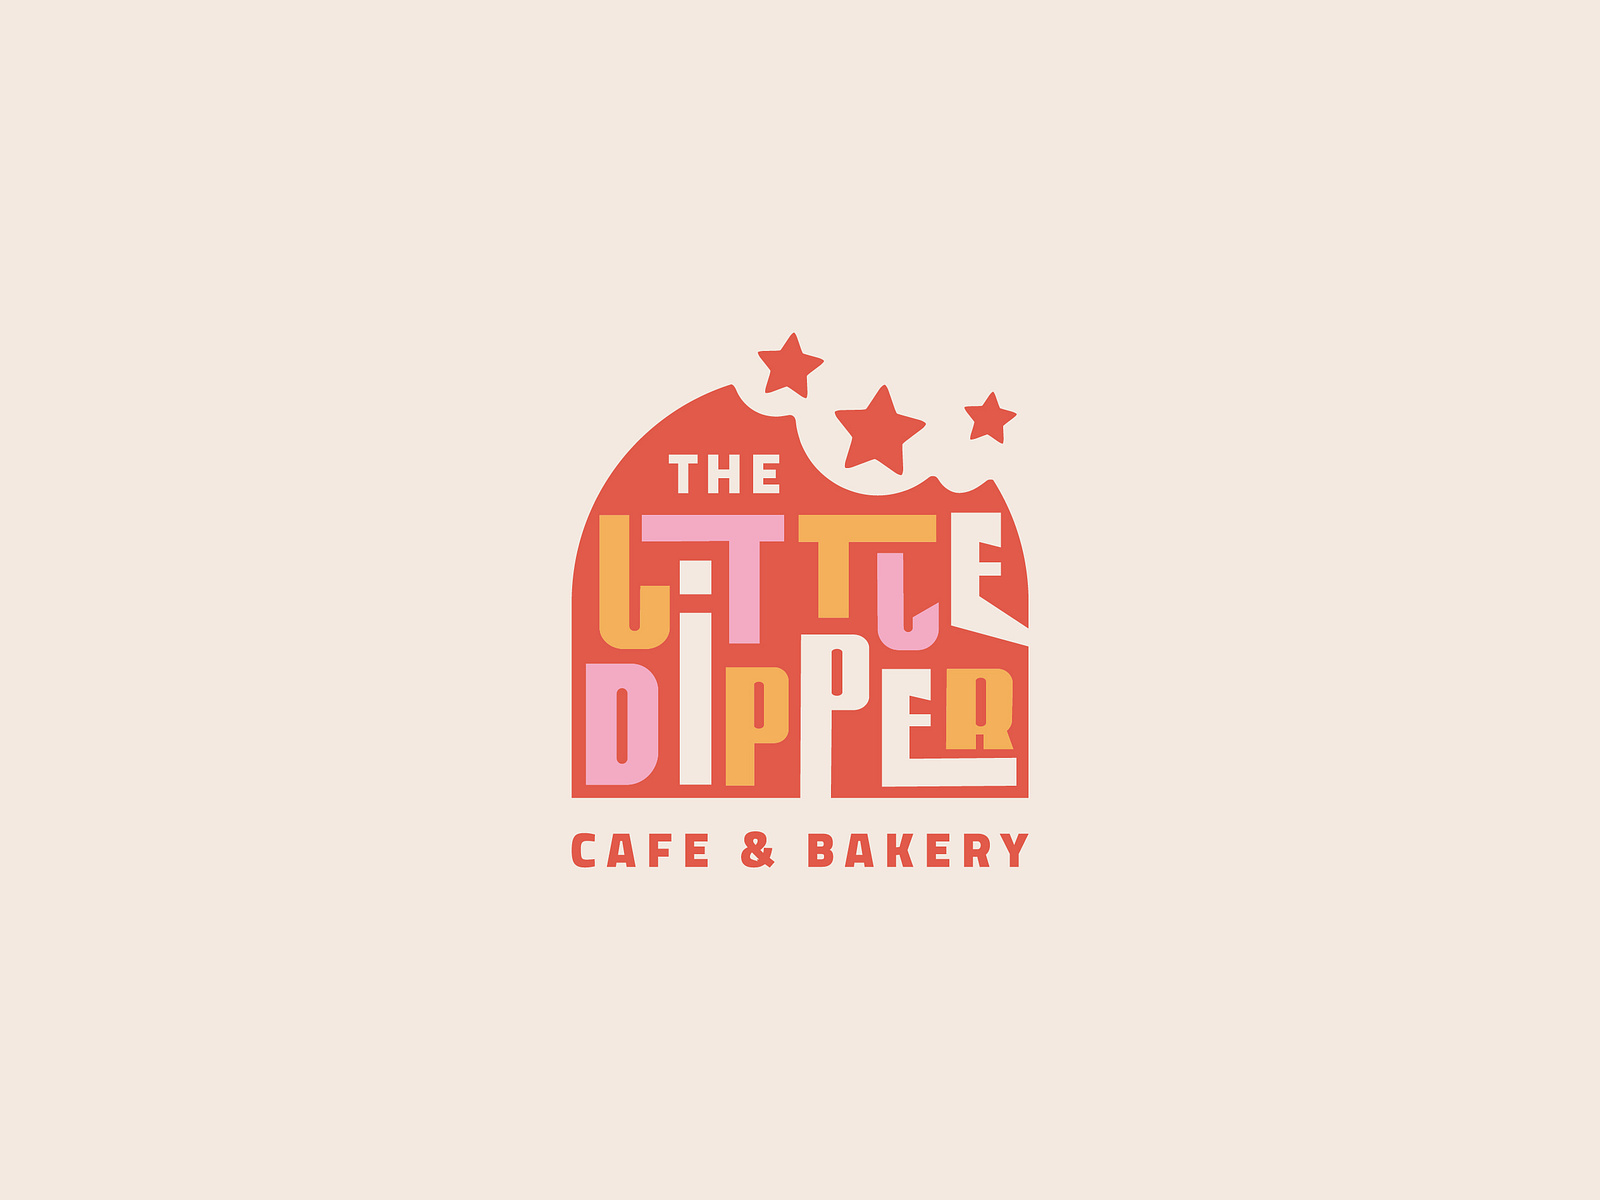 Brand Identity Design - The Little Dipper Bakery by Art Consulate ...